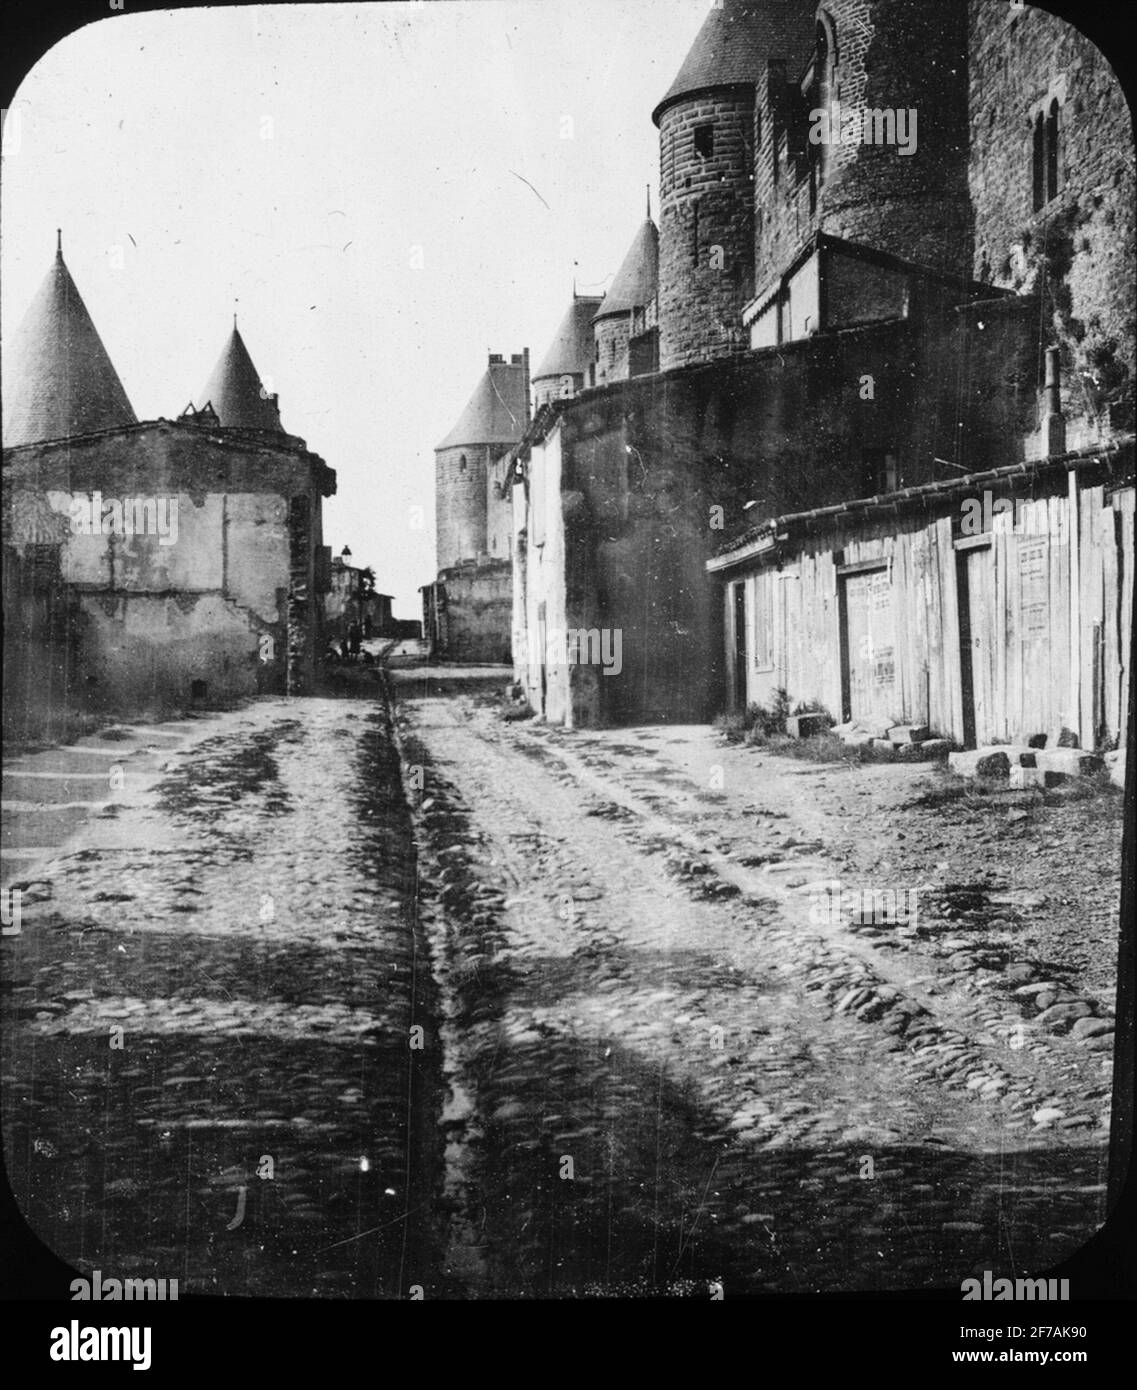 SkiopT icon with motifs of road by medieval castle Cité de Carcassonne.The image has been stored in cardboard labeled: Höstesan 1907. Carcassonne.8. NO: 13. Stock Photo